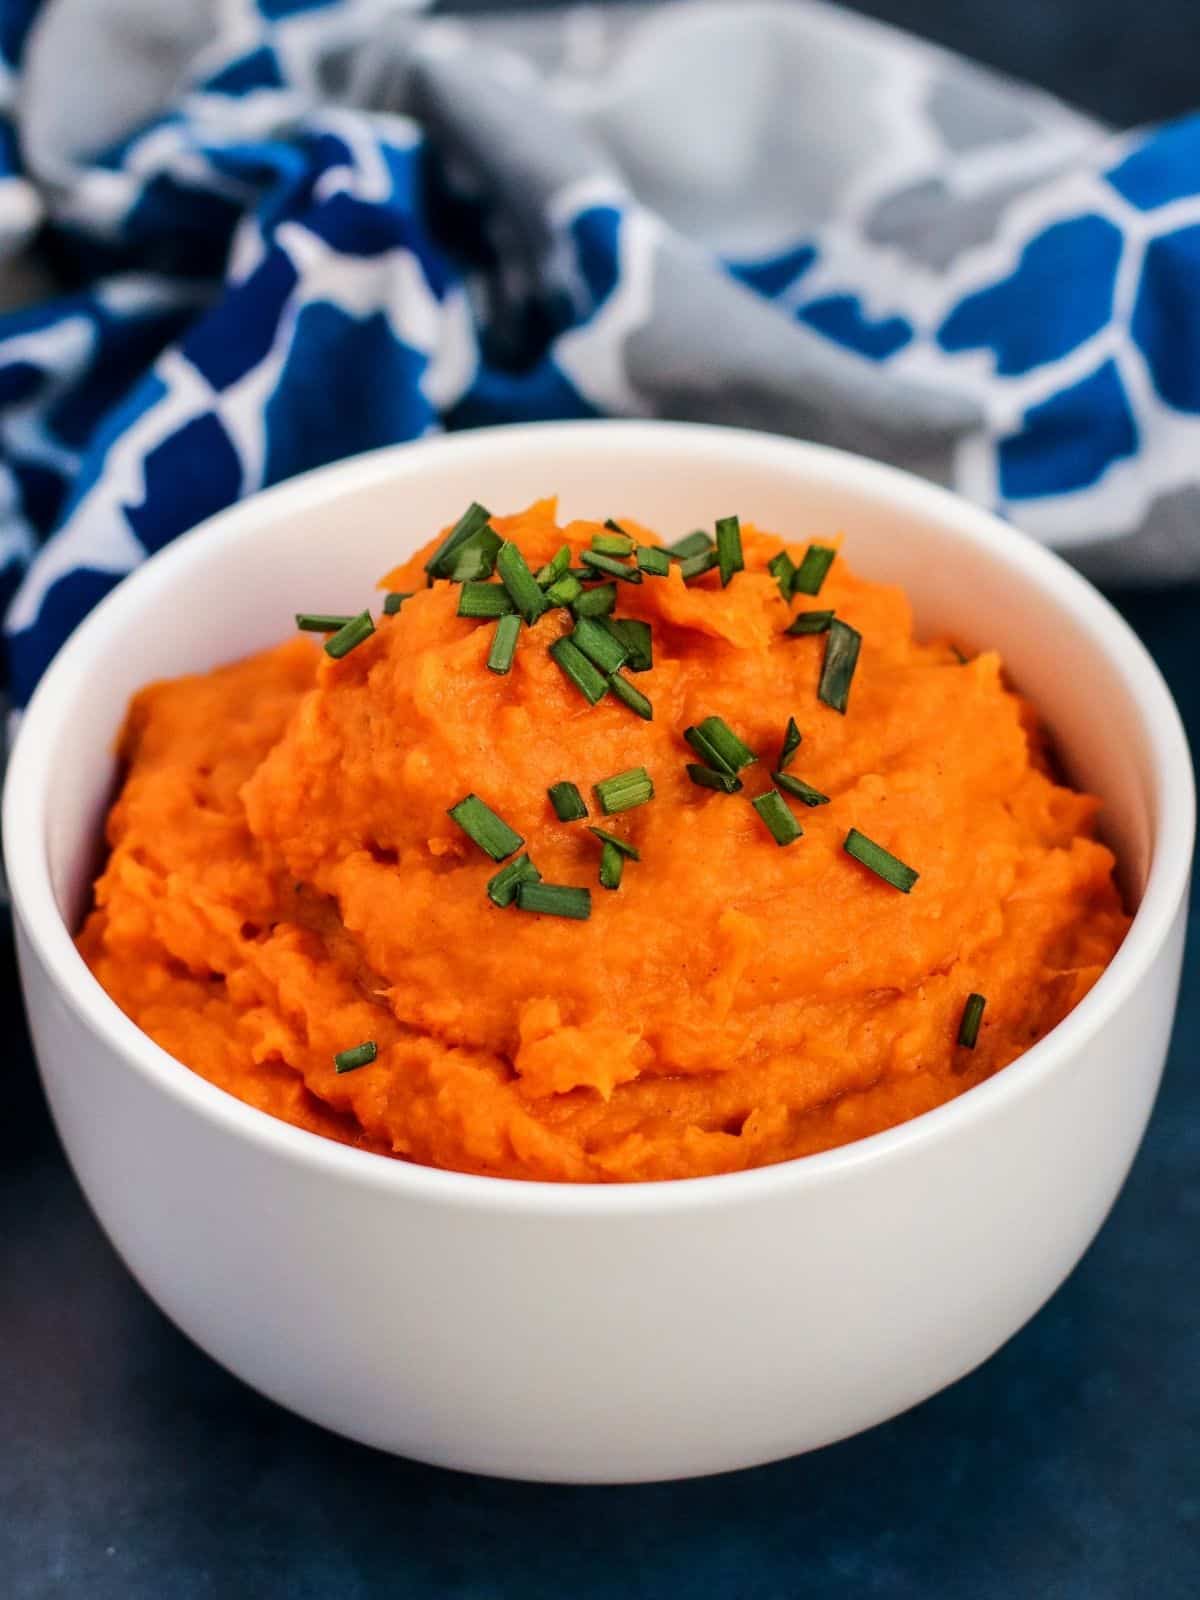 Bowl of mashed sweet potatoes topped with fresh chives next to a blue and white napkin.